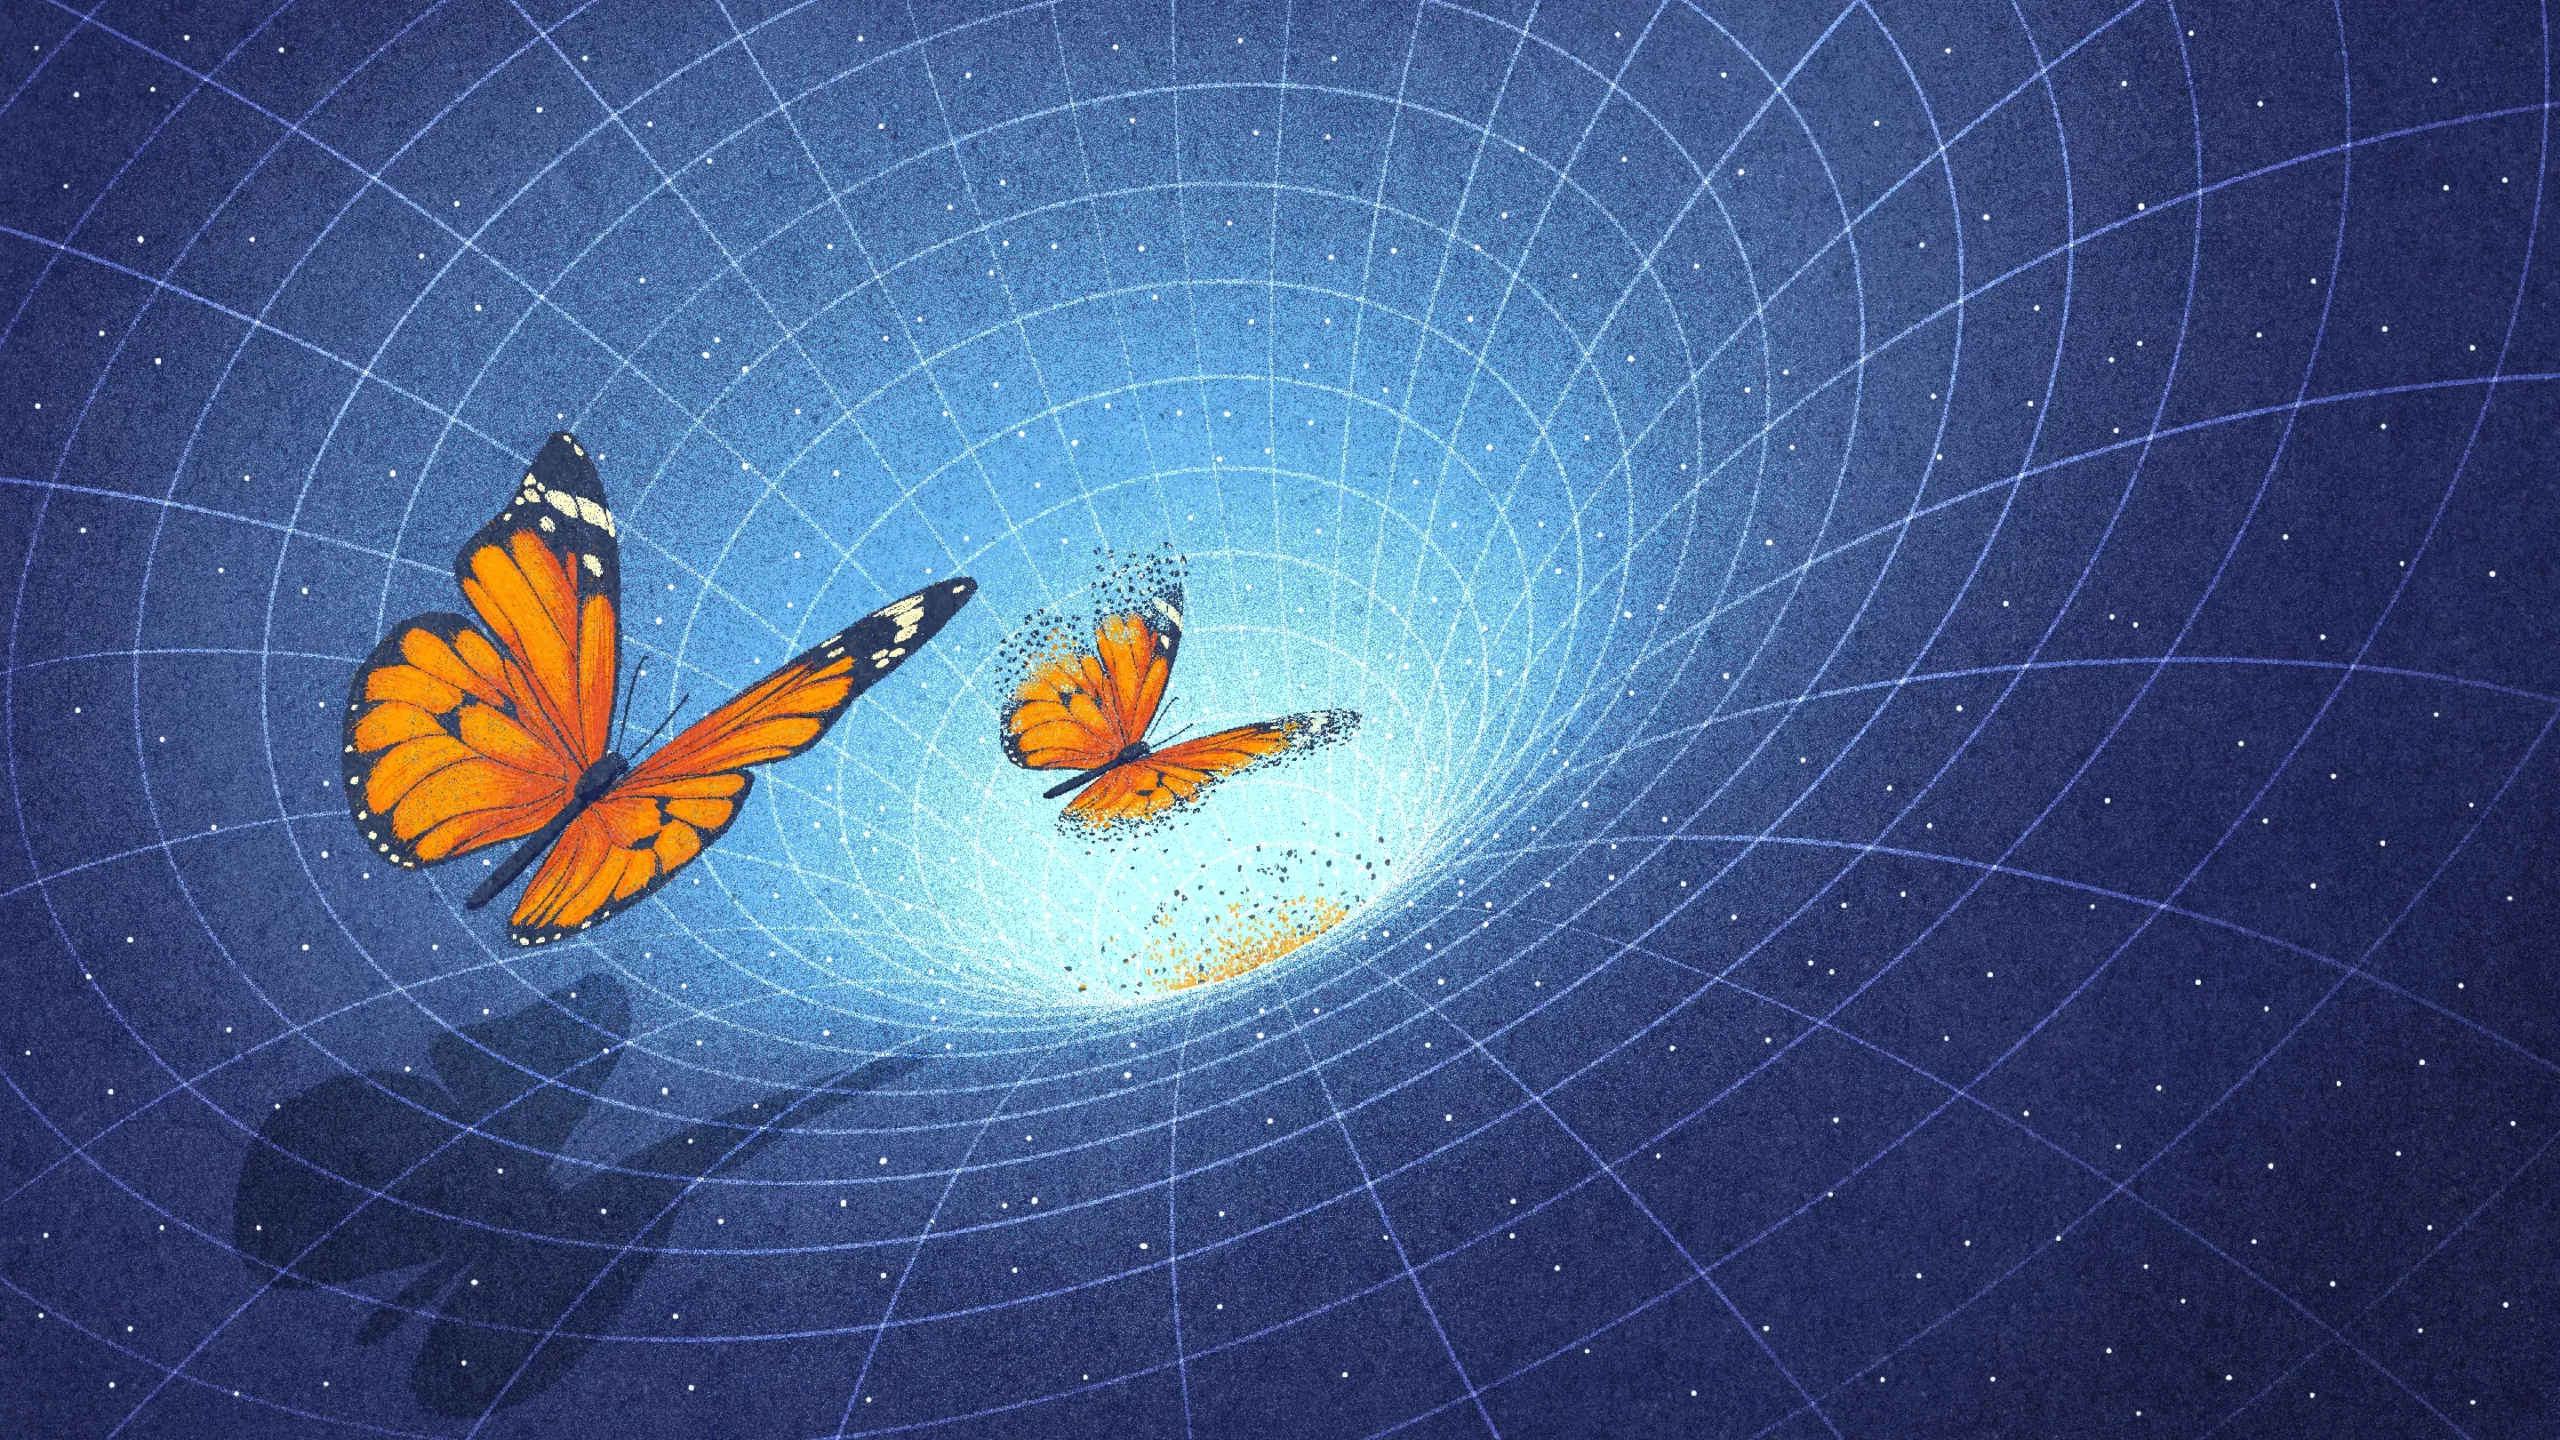 Wormhole Experiment Called Into Question